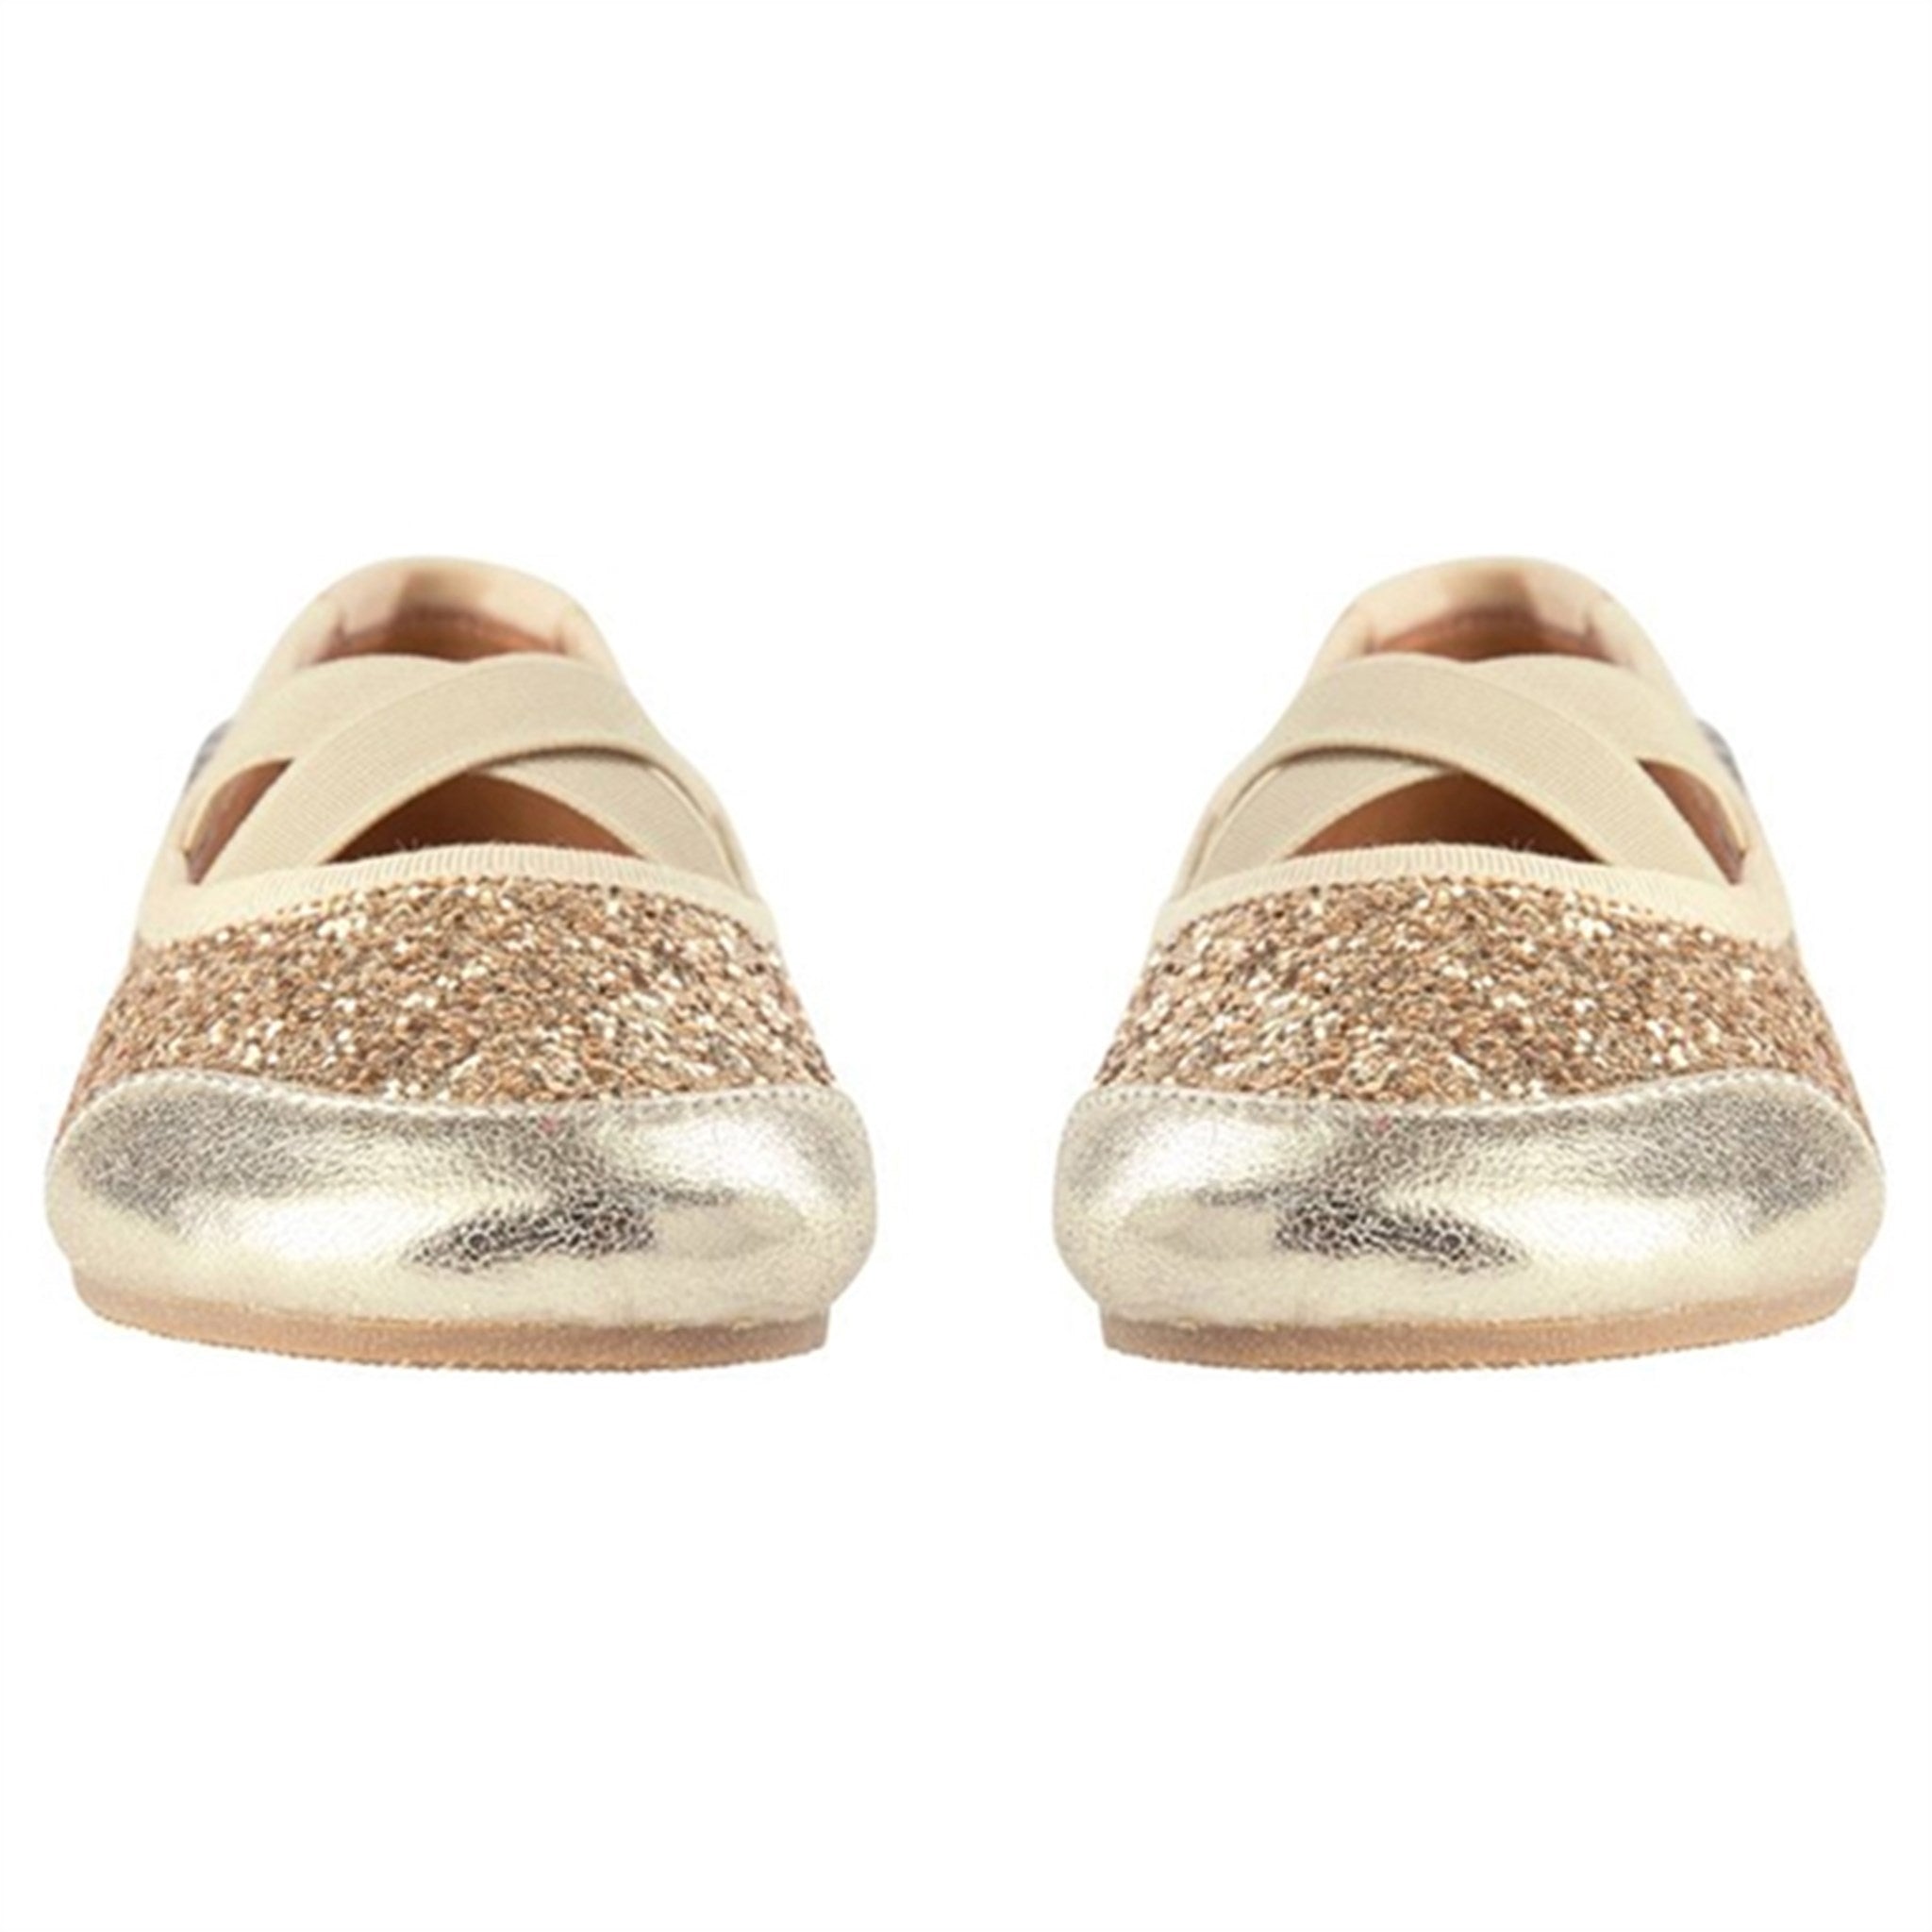 Petit by Sofie Schnoor Ballerina Indoors Shoes Champagne 3